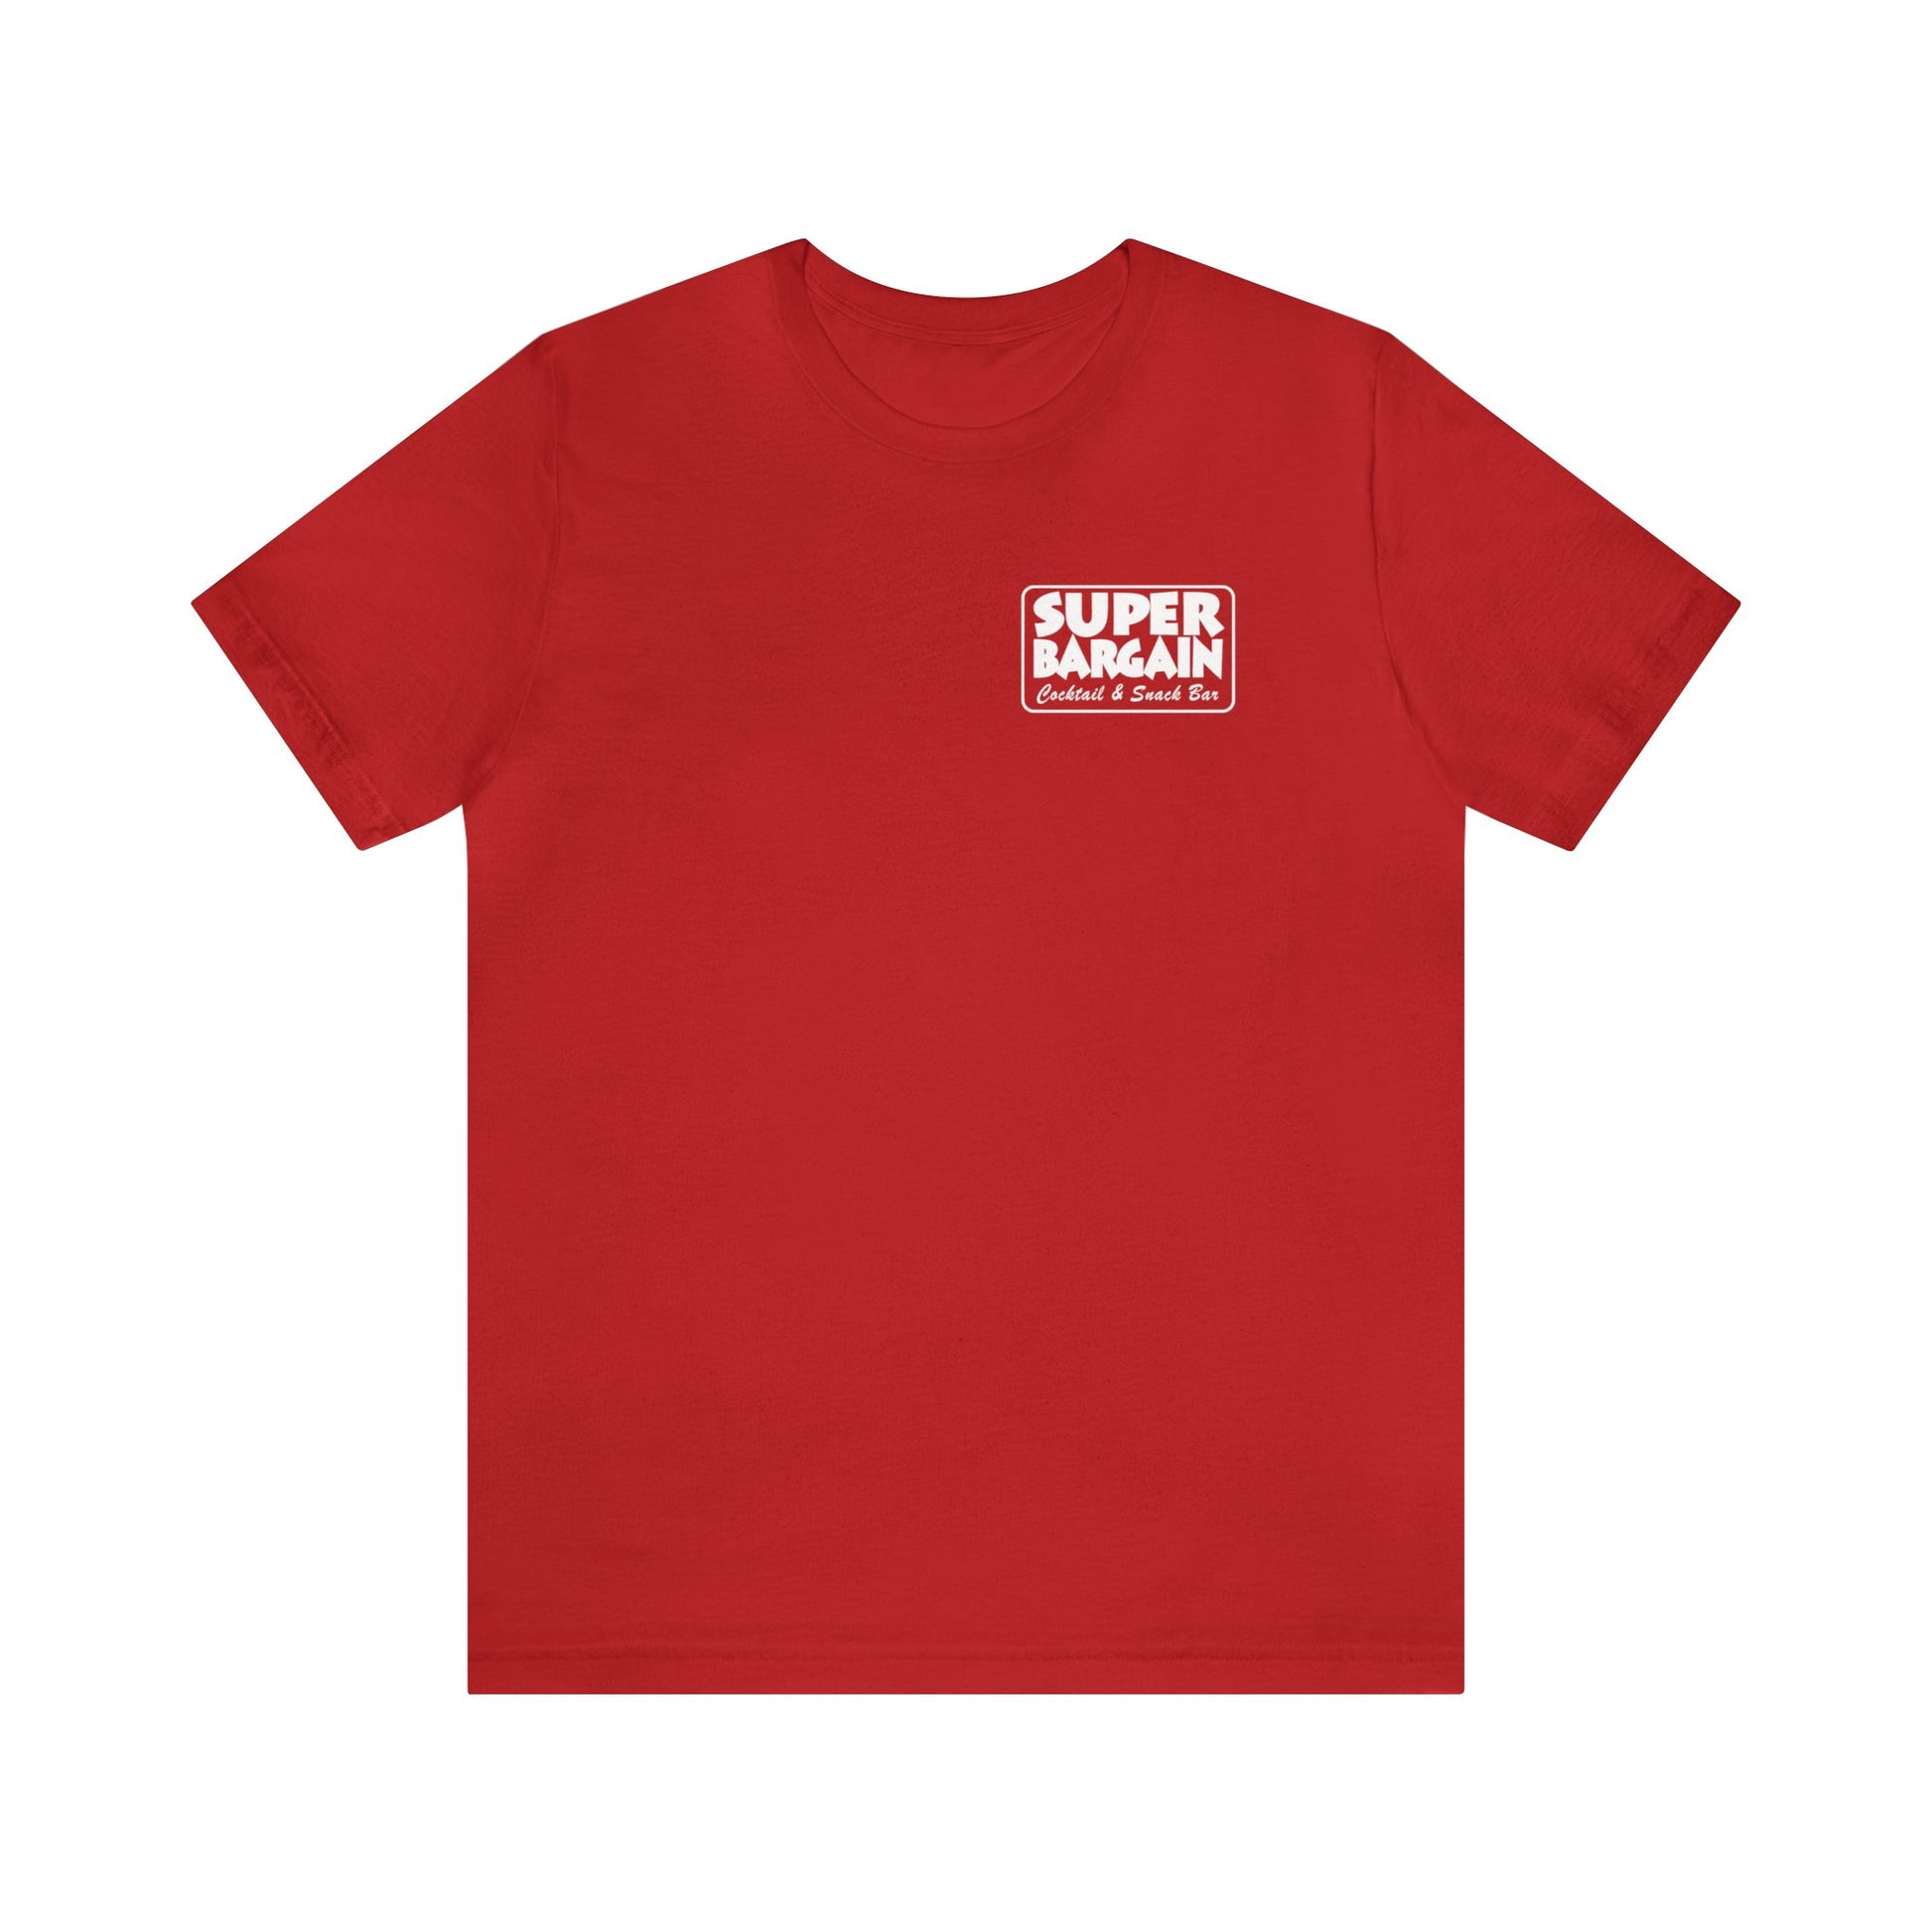 A Printify Unisex Jersey Short Sleeve Monochrome Logo Tee with the logo "Super Japan Game Show Toronto" in white text over a red rectangle on the upper left chest area, displayed flat on a white background.